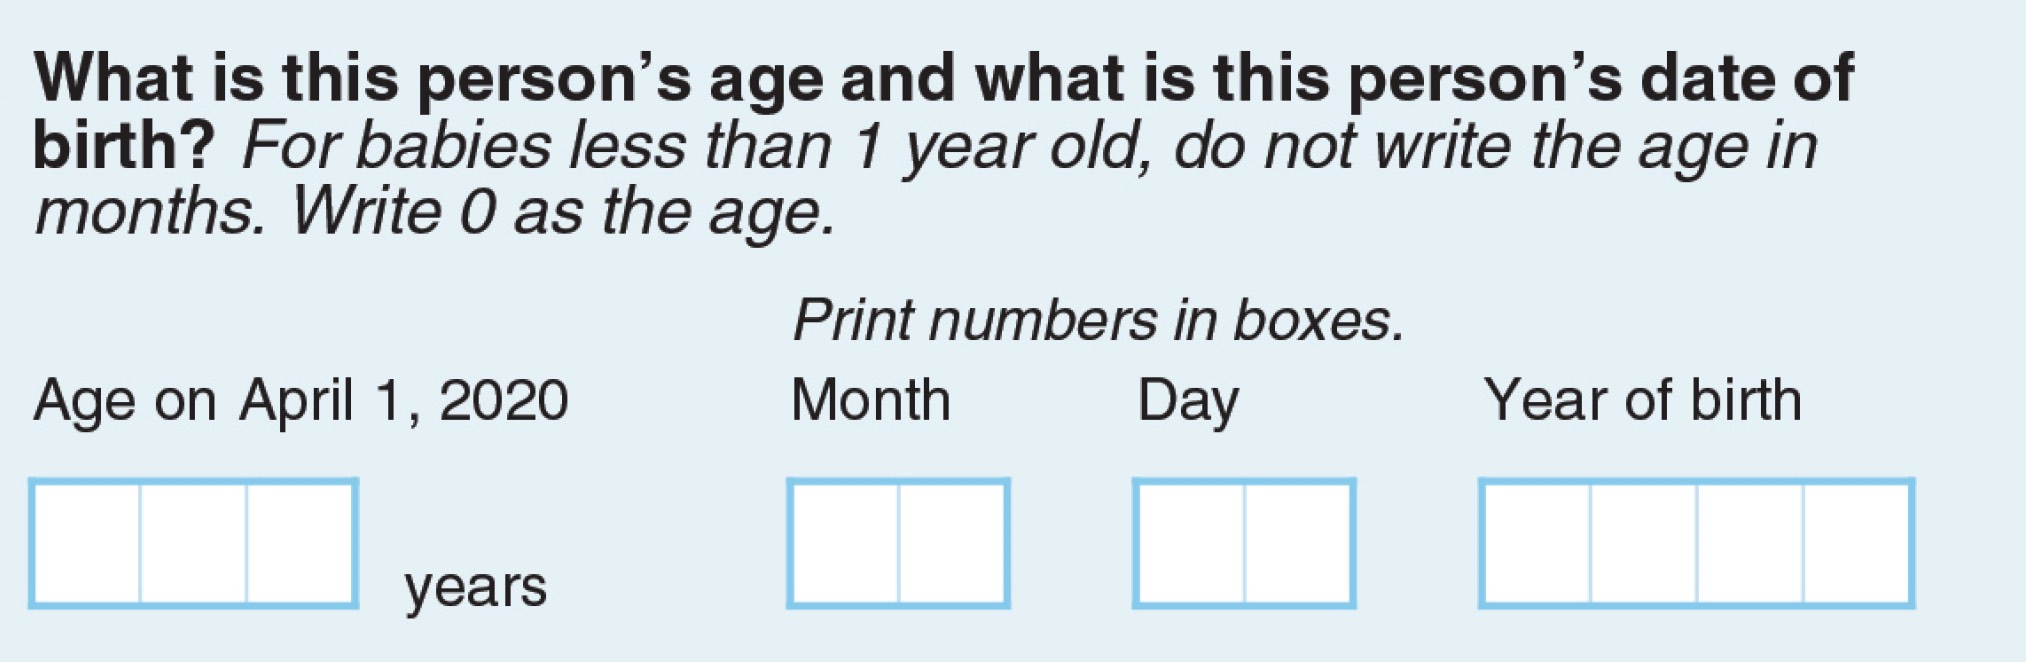 Census question: What is this person's age and what is this person's date of birth?